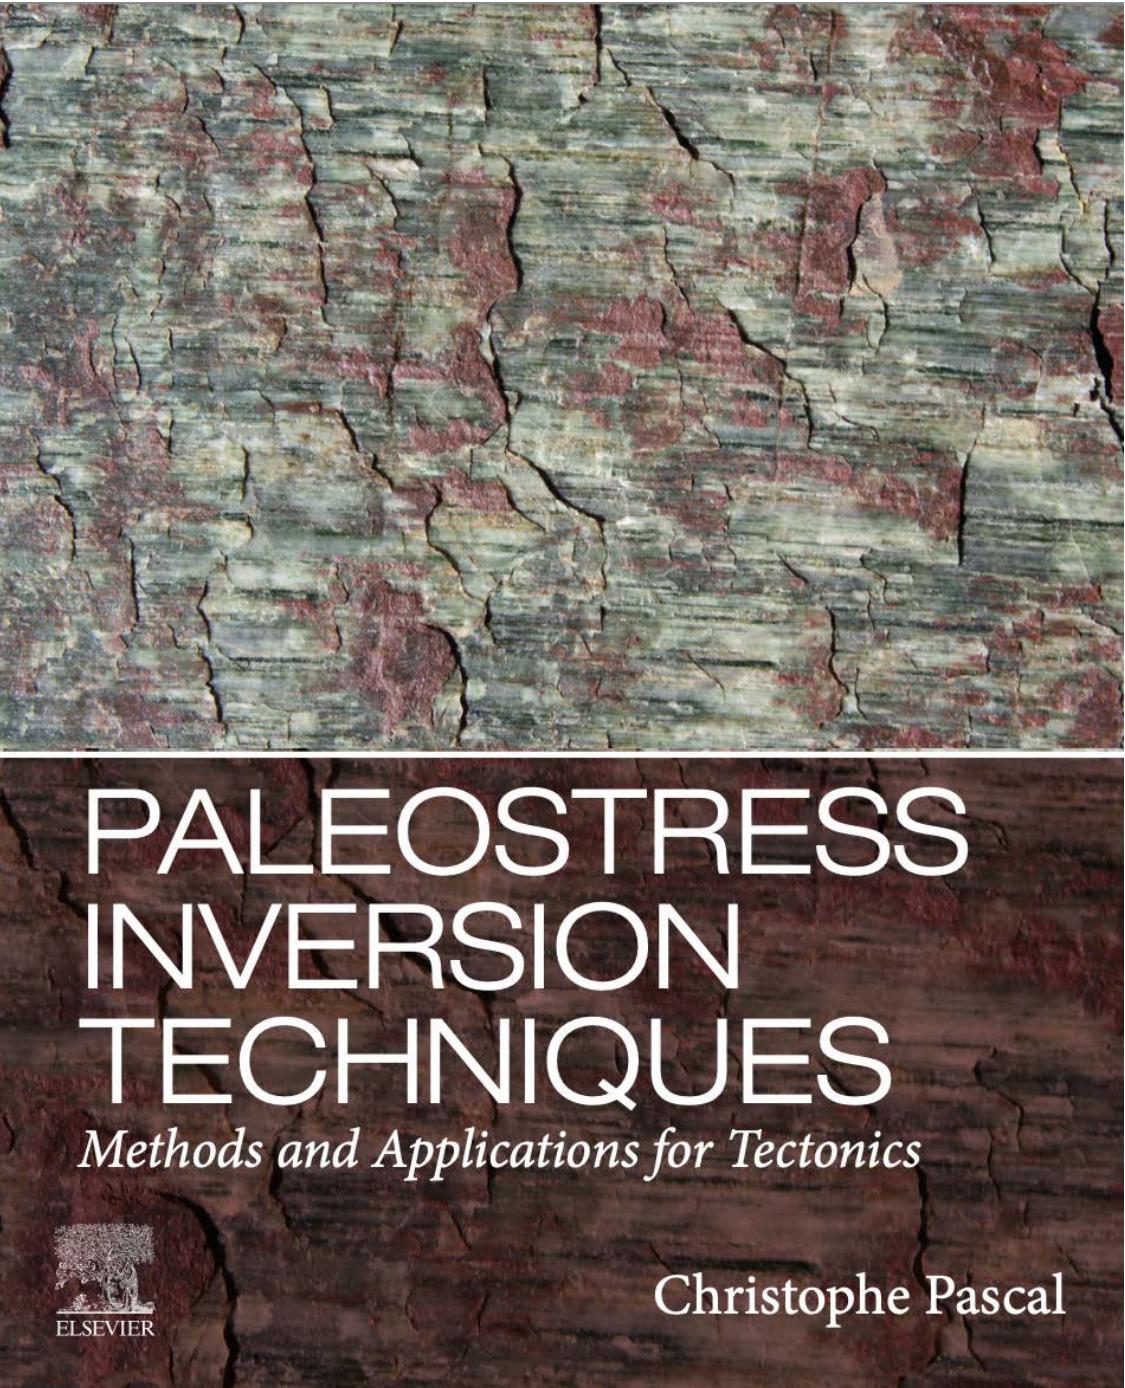 (eBook PDF)Paleostress Inversion Techniques Methods and Applications for Tectonics by Christophe Pascal